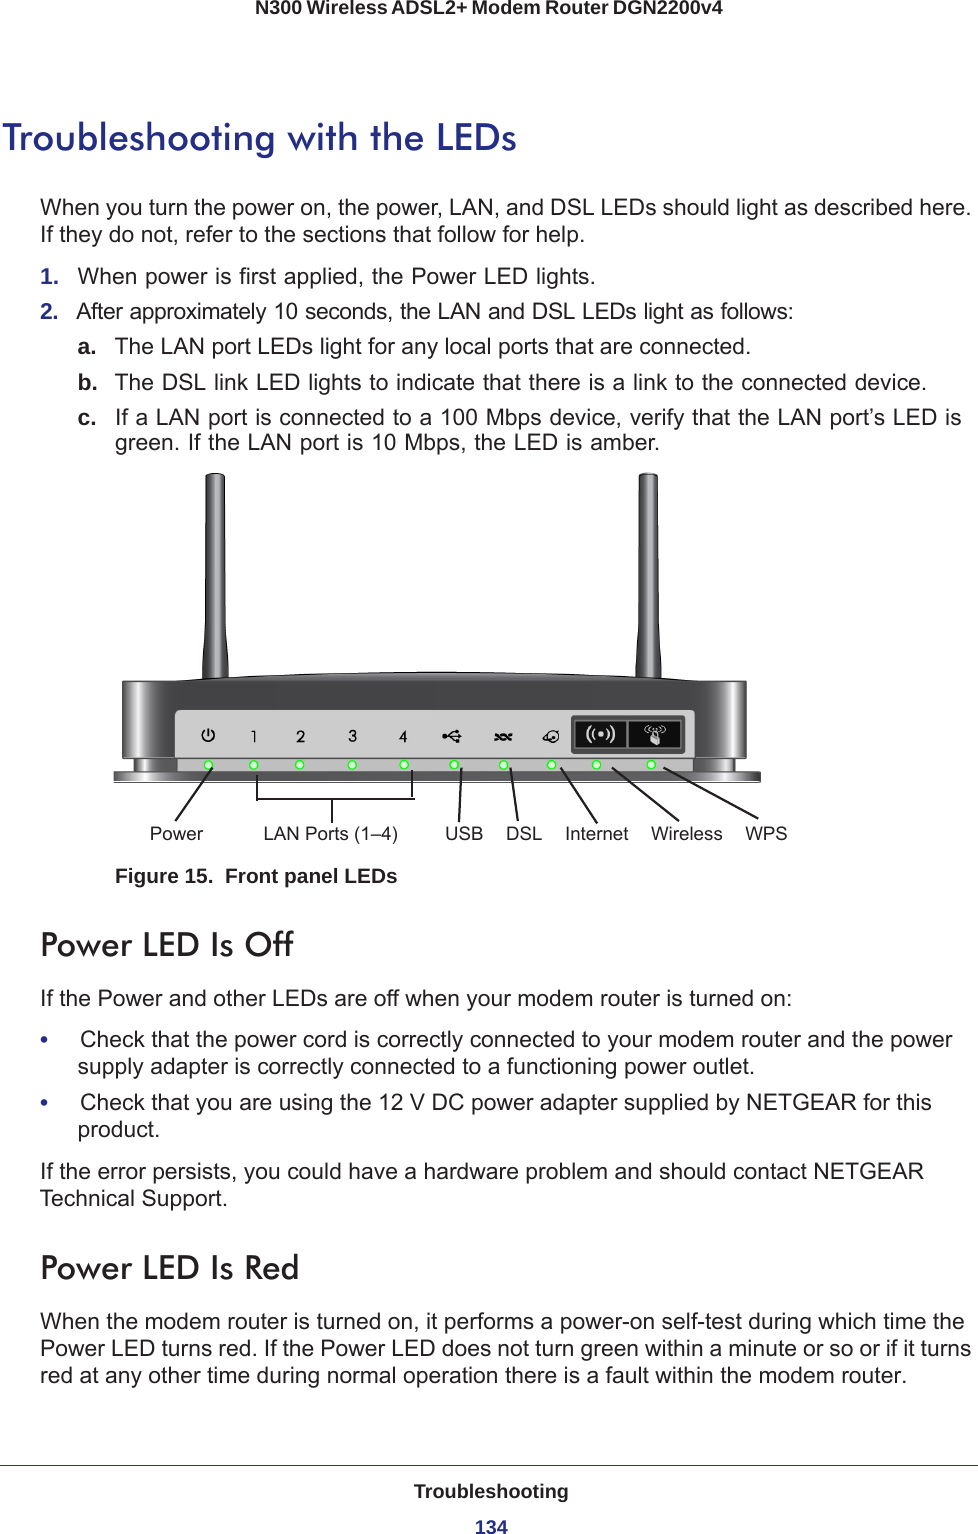 Troubleshooting134N300 Wireless ADSL2+ Modem Router DGN2200v4 Troubleshooting with the LEDsWhen you turn the power on, the power, LAN, and DSL LEDs should light as described here. If they do not, refer to the sections that follow for help.1.  When power is first applied, the Power LED lights.2.  After approximately 10 seconds, the LAN and DSL LEDs light as follows:a. The LAN port LEDs light for any local ports that are connected.b.  The DSL link LED lights to indicate that there is a link to the connected device.c.  If a LAN port is connected to a 100 Mbps device, verify that the LAN port’s LED is green. If the LAN port is 10 Mbps, the LED is amber.Power LAN Ports (1–4) USB DSL Wireless WPSInternetFigure 15.  Front panel LEDsPower LED Is OffIf the Power and other LEDs are off when your modem router is turned on:•     Check that the power cord is correctly connected to your modem router and the power supply adapter is correctly connected to a functioning power outlet. •     Check that you are using the 12 V DC power adapter supplied by NETGEAR for this product.If the error persists, you could have a hardware problem and should contact NETGEAR Technical Support.Power LED Is RedWhen the modem router is turned on, it performs a power-on self-test during which time the Power LED turns red. If the Power LED does not turn green within a minute or so or if it turns red at any other time during normal operation there is a fault within the modem router. 